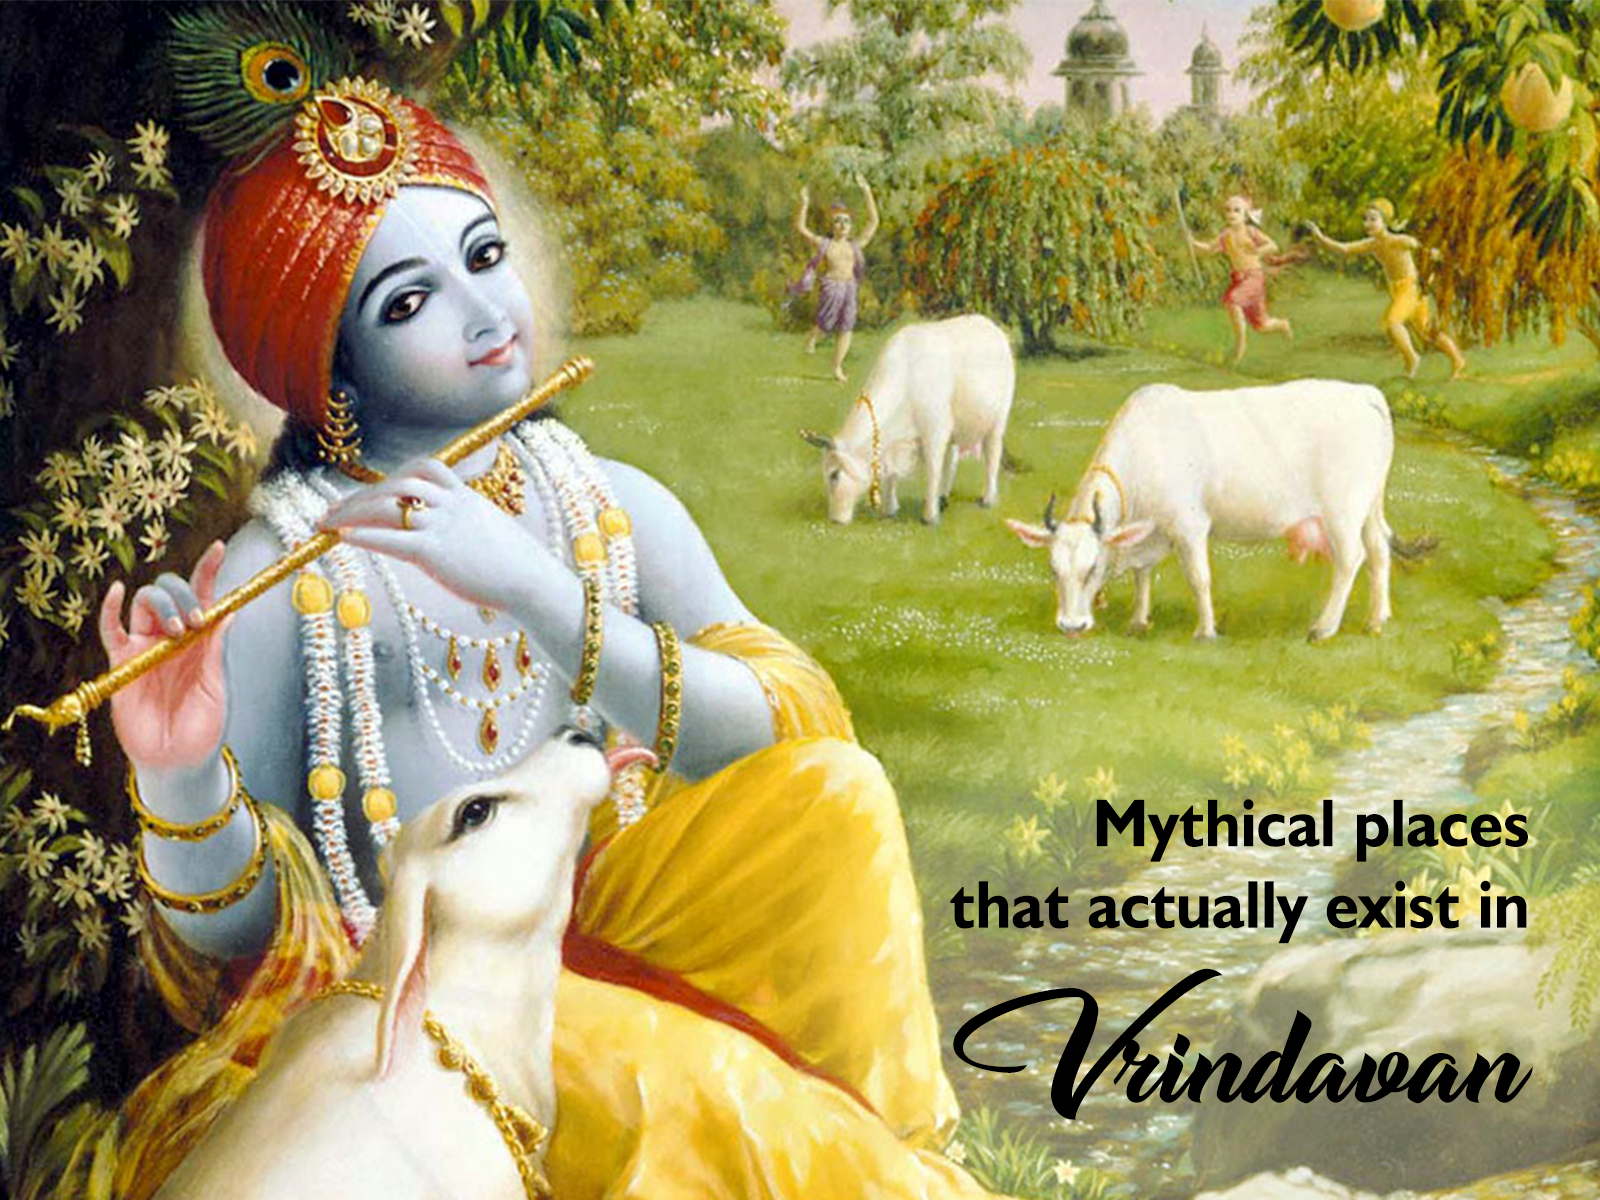 Five mythical places that actually exist in Vrindavan